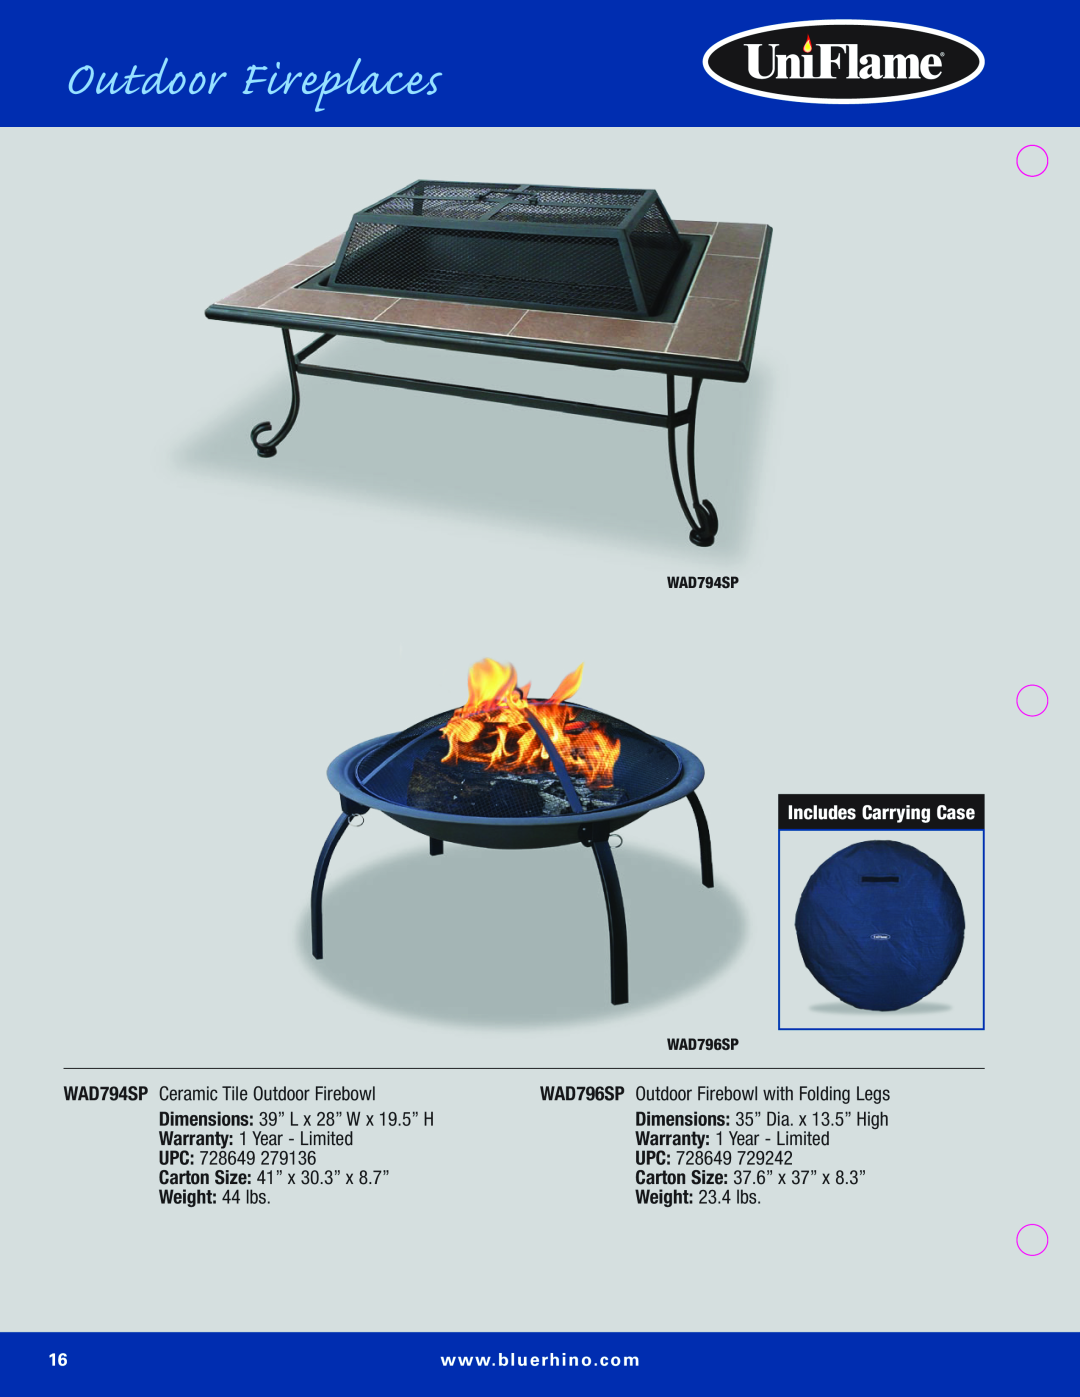 Blue Rhino Outdoor Lighting manual Outdoor Fireplaces, Includes Carrying Case, WAD794SP Ceramic Tile Outdoor Firebowl 